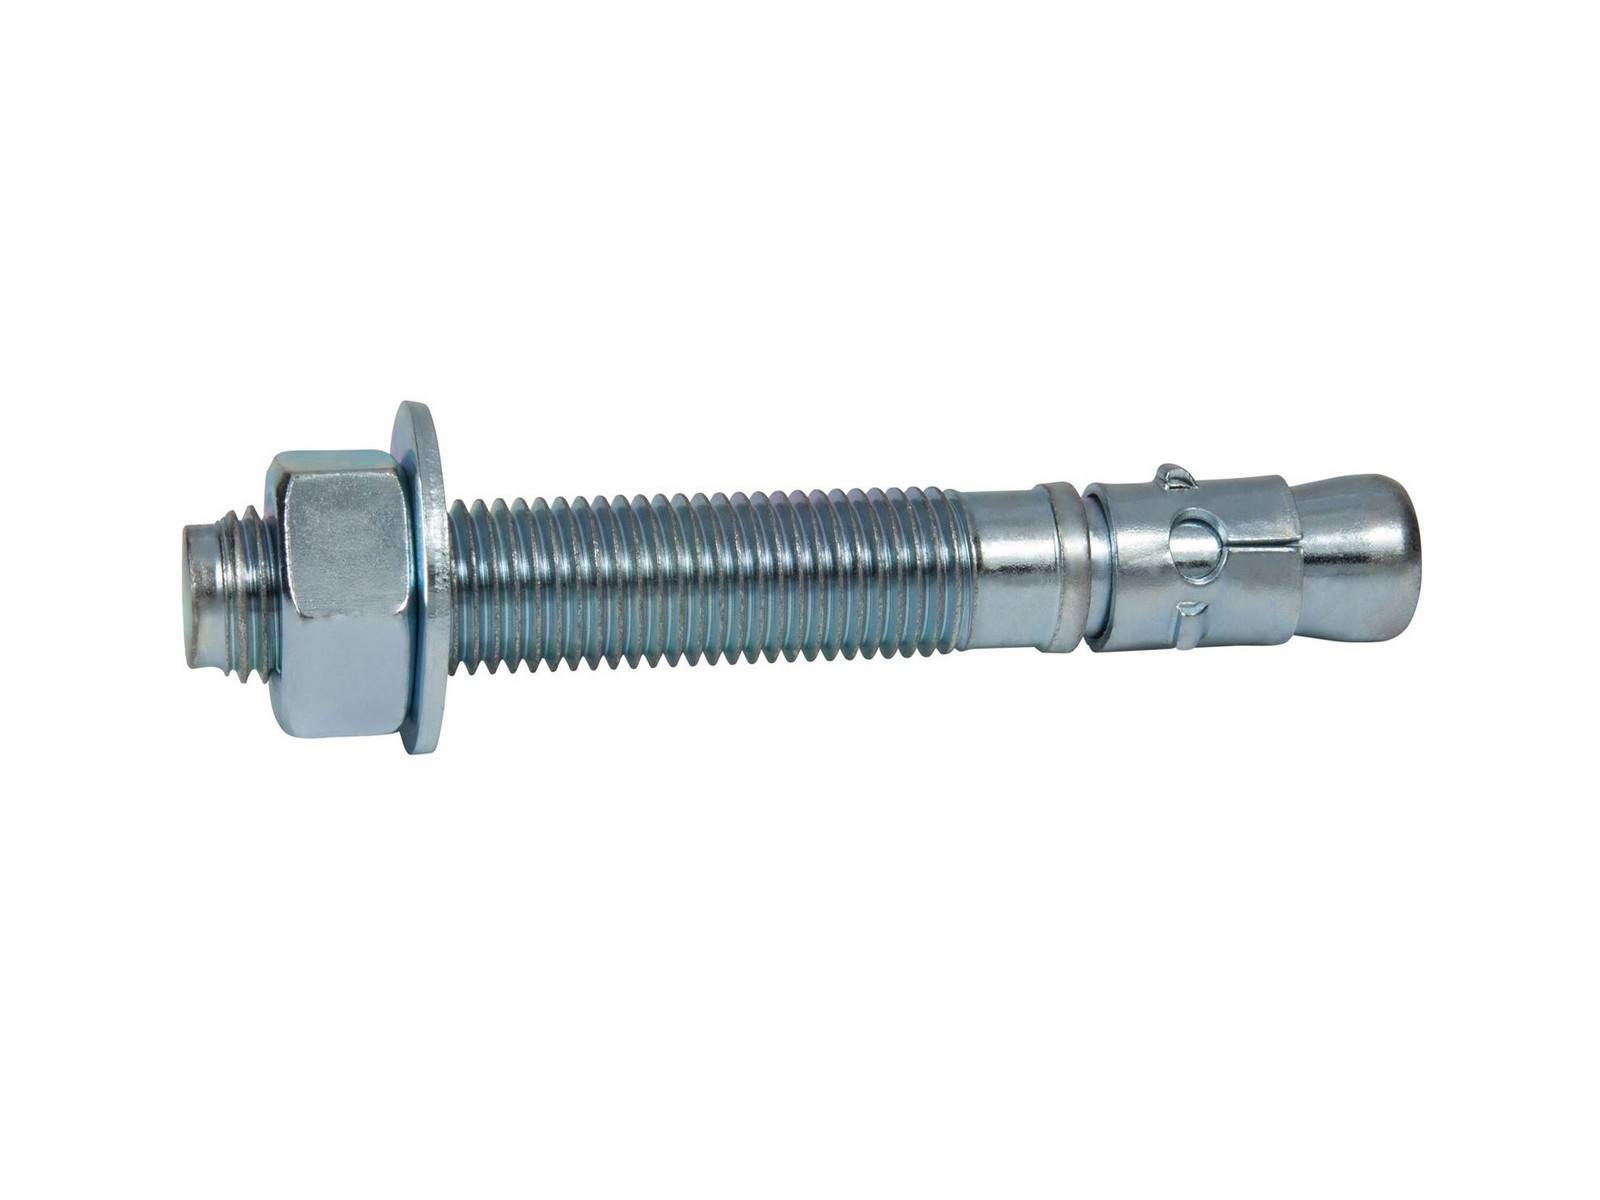 Wej-It Nail-It DN1410 Drive Anchor Pack of 100 1/4 Diameter Zinc Plated Finish Zamac Alloy 1 Length Meets GSA FFS-325 Group V Type 2 Class 2 Specifications